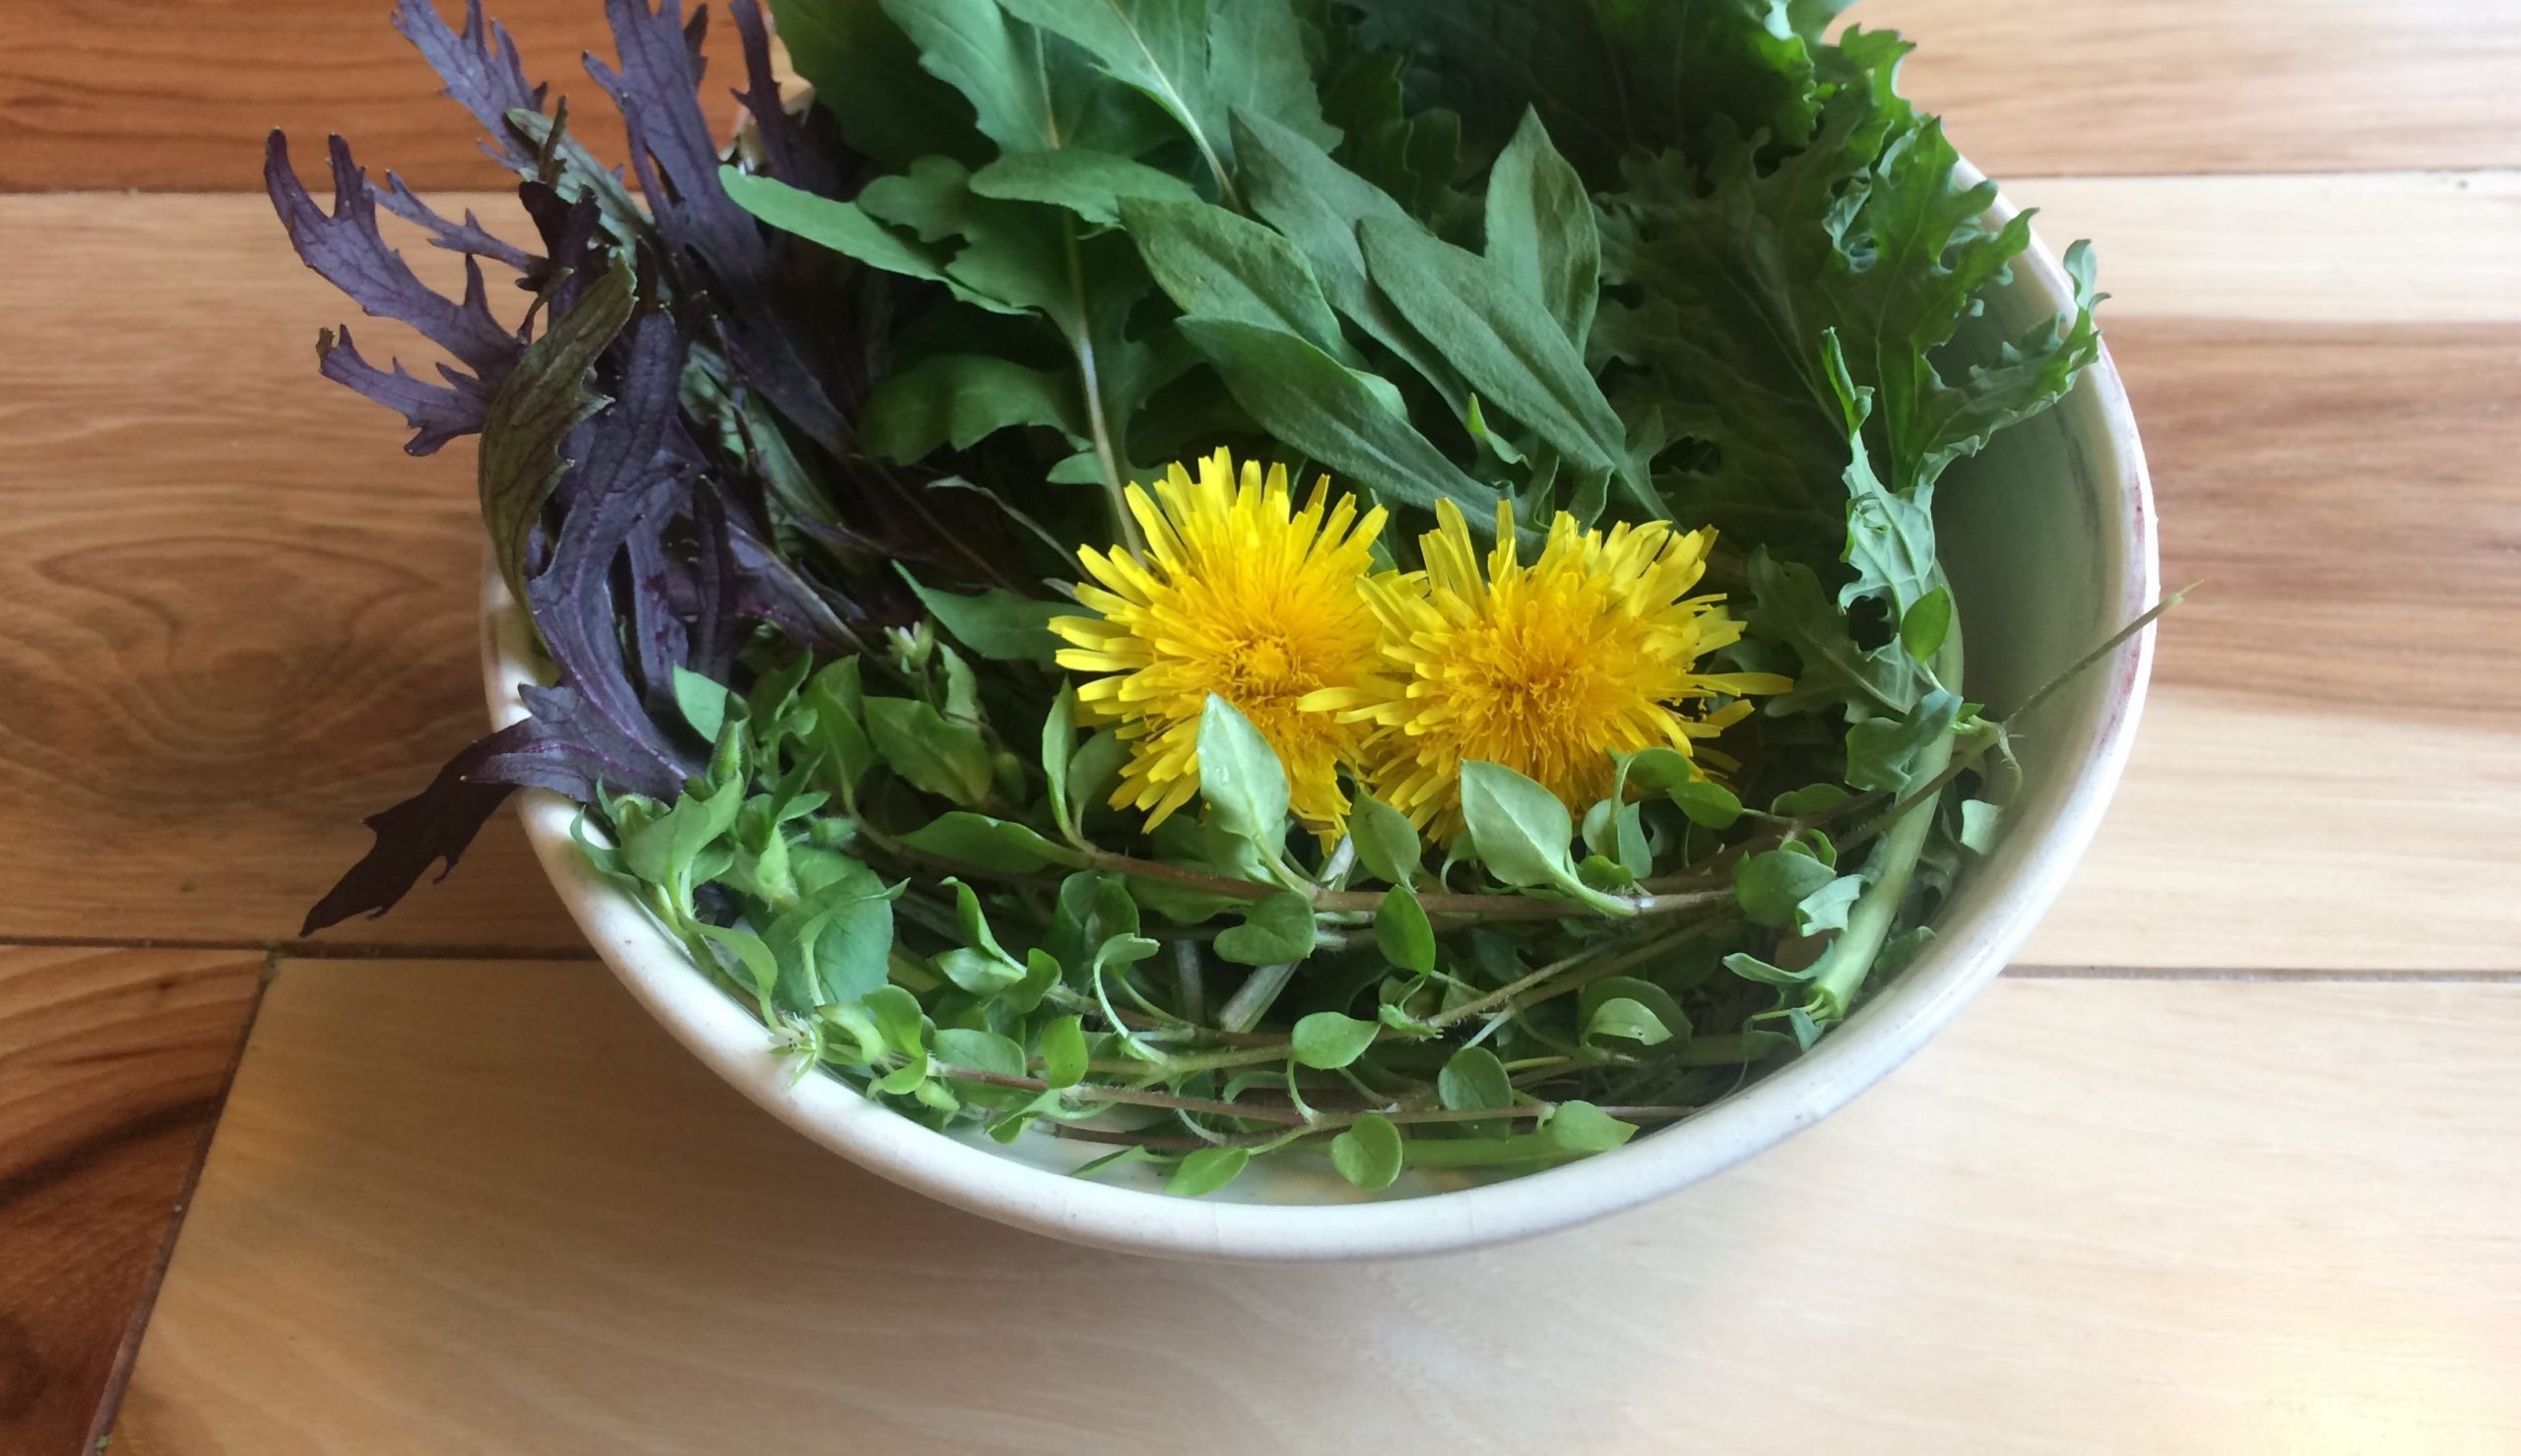 Wild and homegrown greens can be combined to make a delicious and colorful salad.